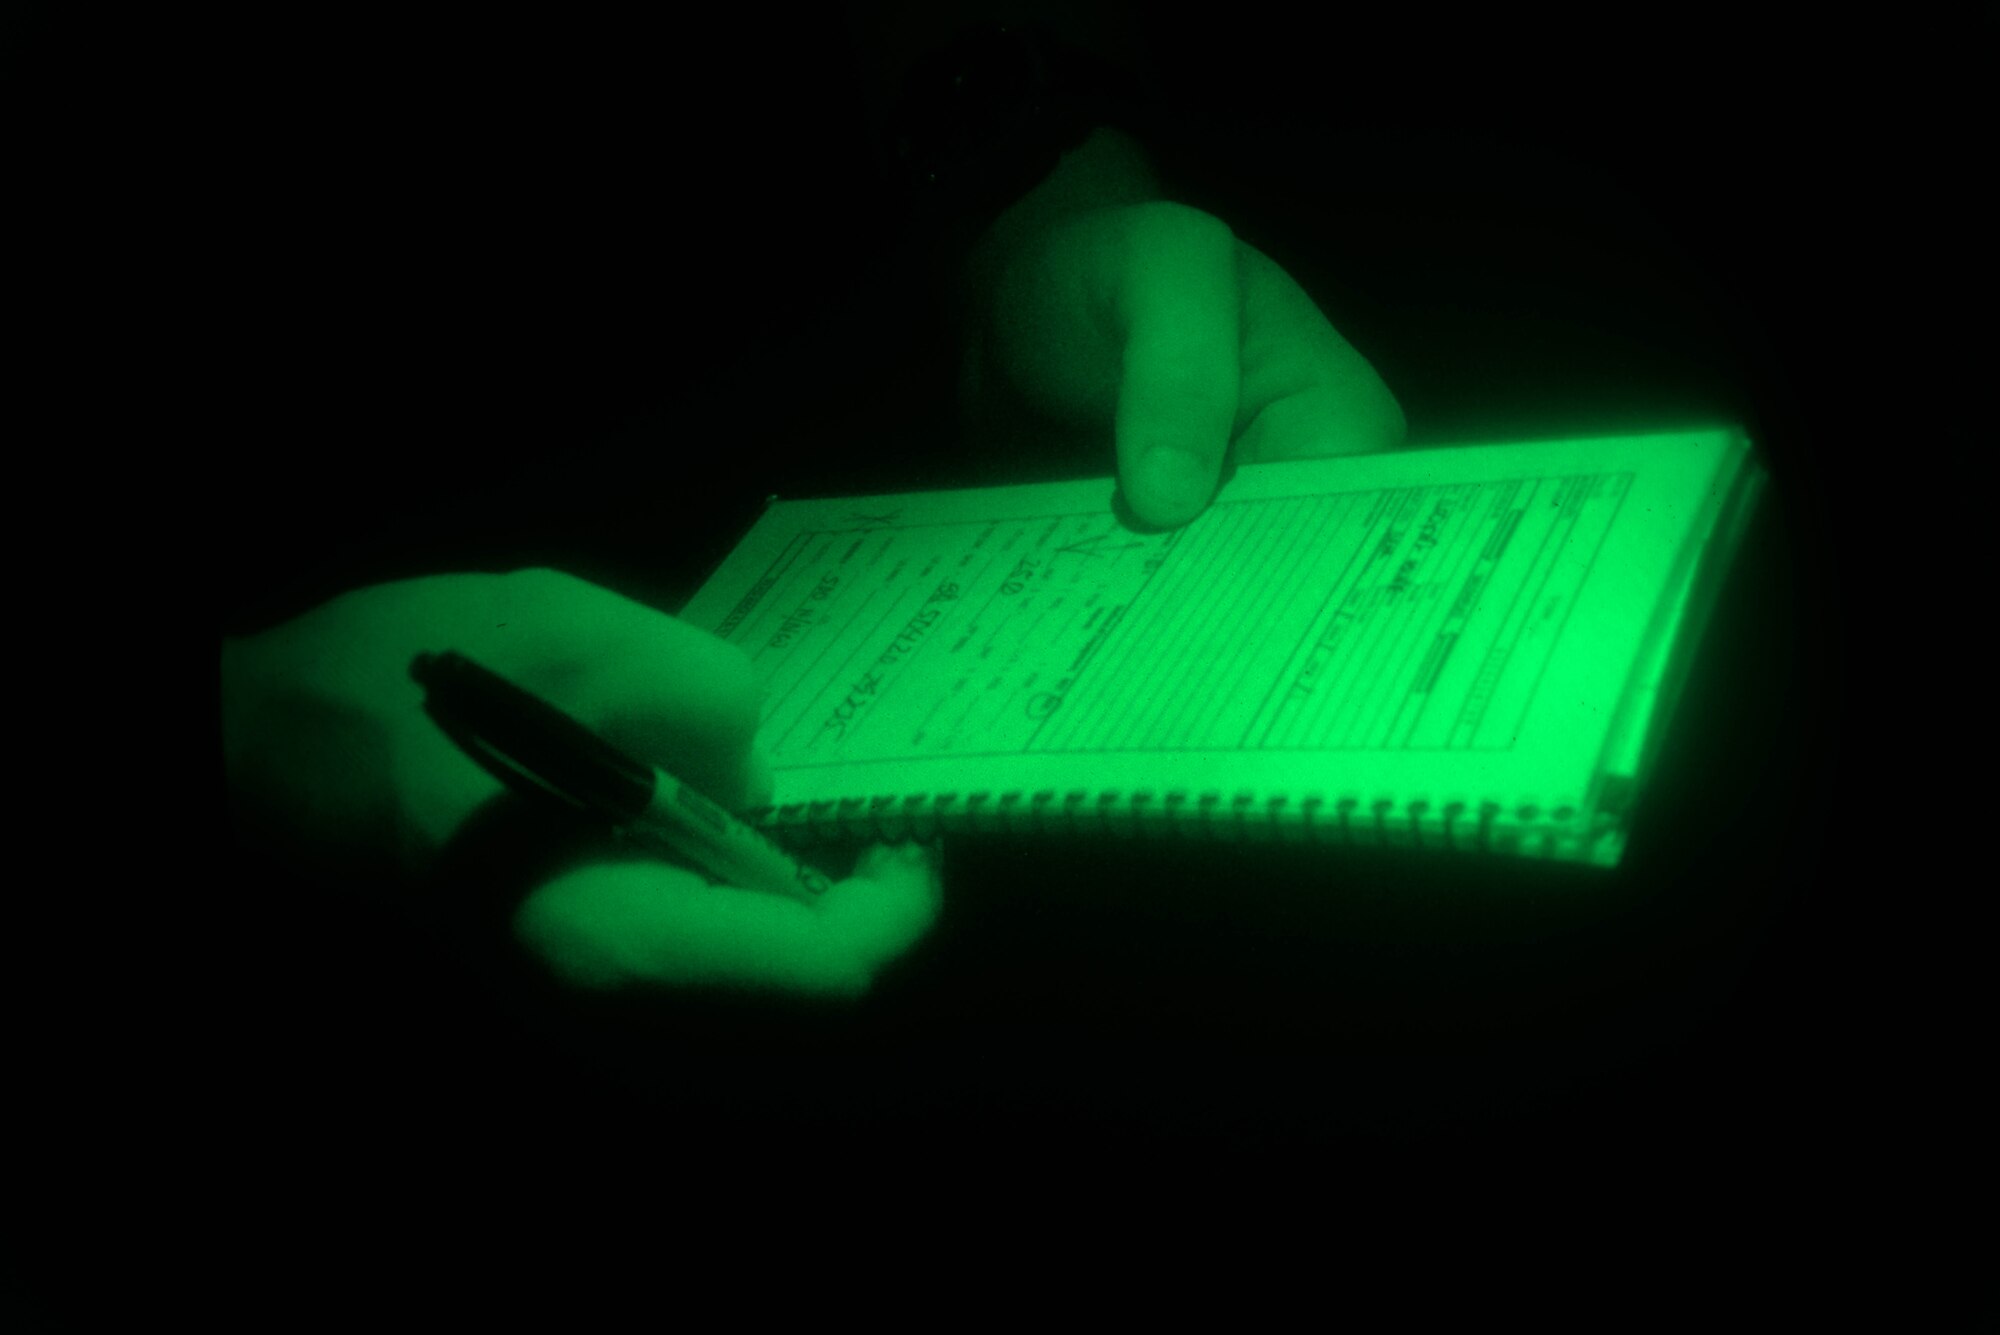 Senior Airman Ronald Page, 3rd Air Support Operations Squadron Tactical Air Control Party Airman, takes notes July 23, 2015, during a close air support exercise at Naval Ordnance Annex, Guam. During night training intervals, Page completed important qualifications training toward his certification as a joint terminal attack controller. (U.S. Air Force photo/Staff Sgt. Alexander W. Riedel/Released)